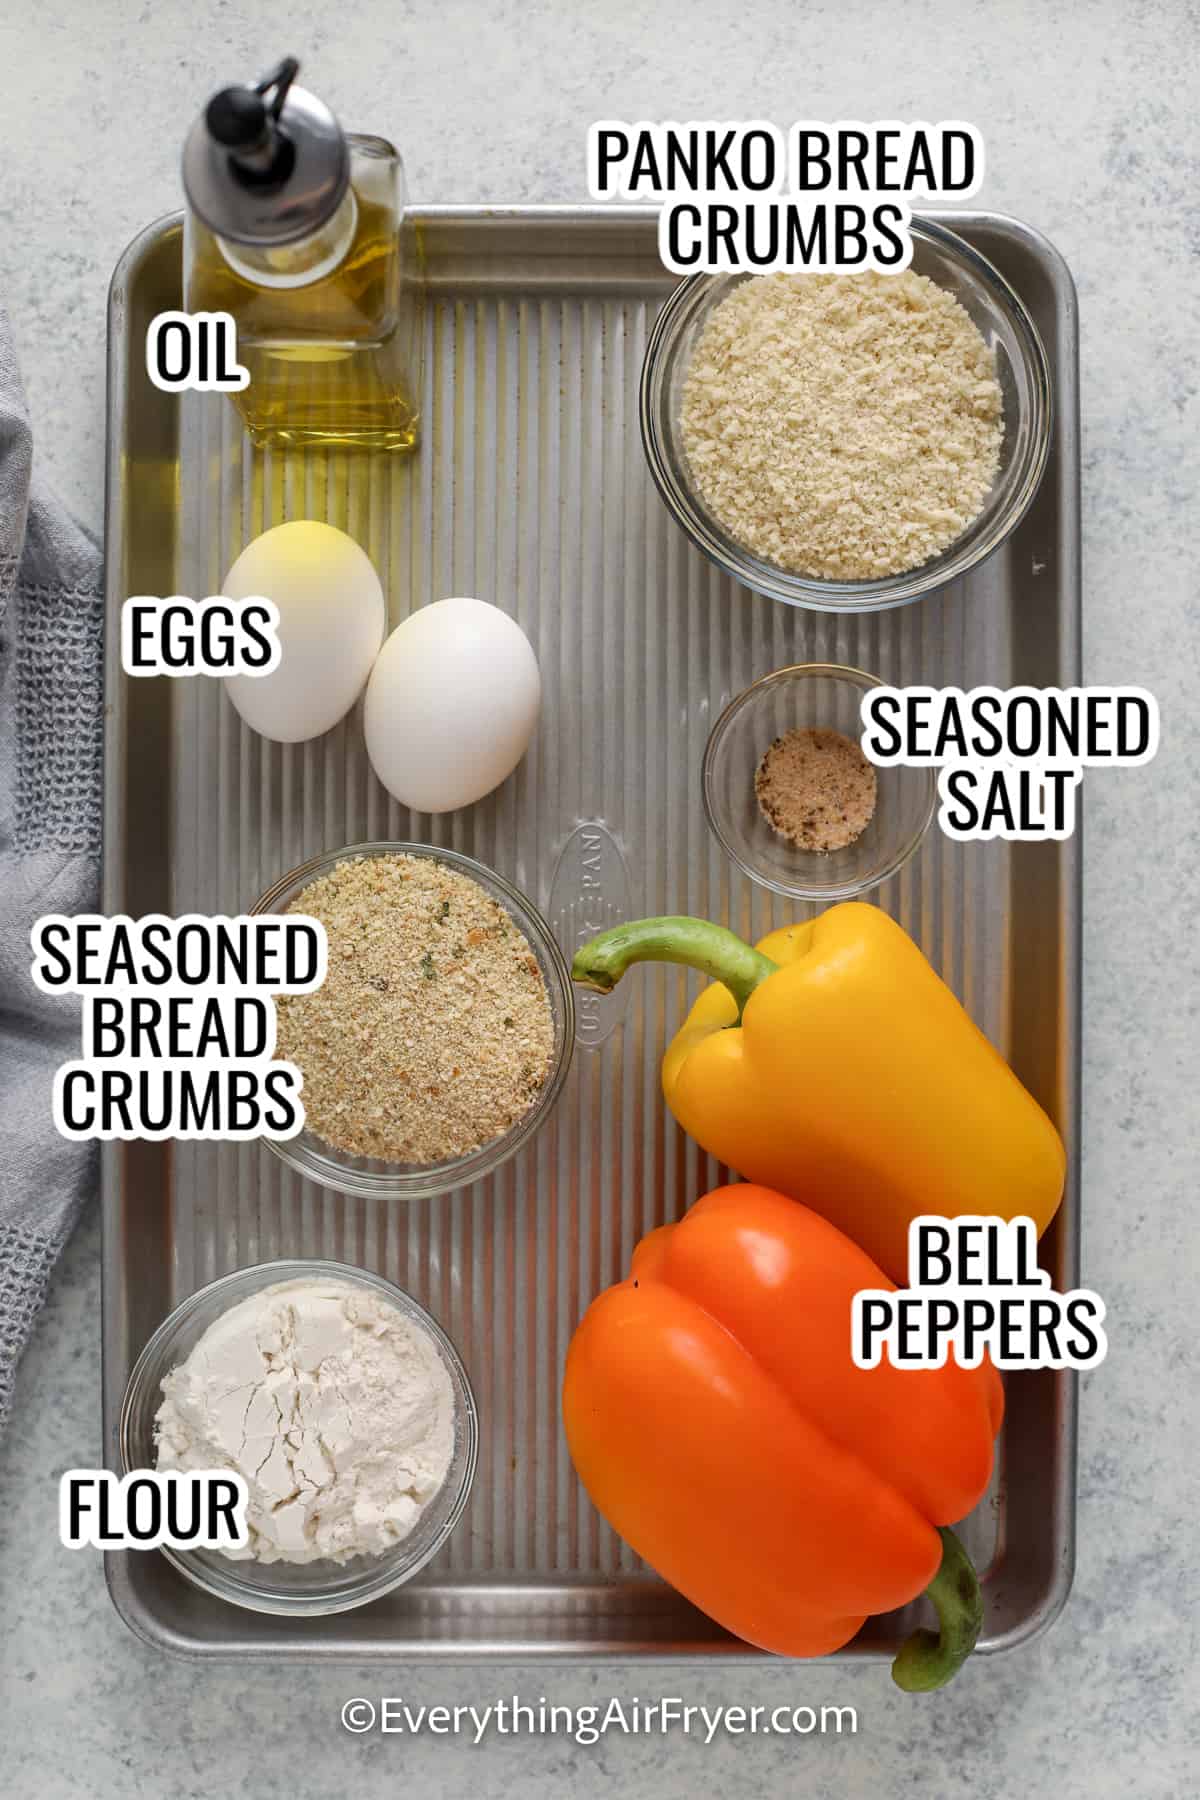 ingredients assembled to make crispy bell peppers including bell peppers, bread crumbs, eggs, flour, oil, and seasoned salt